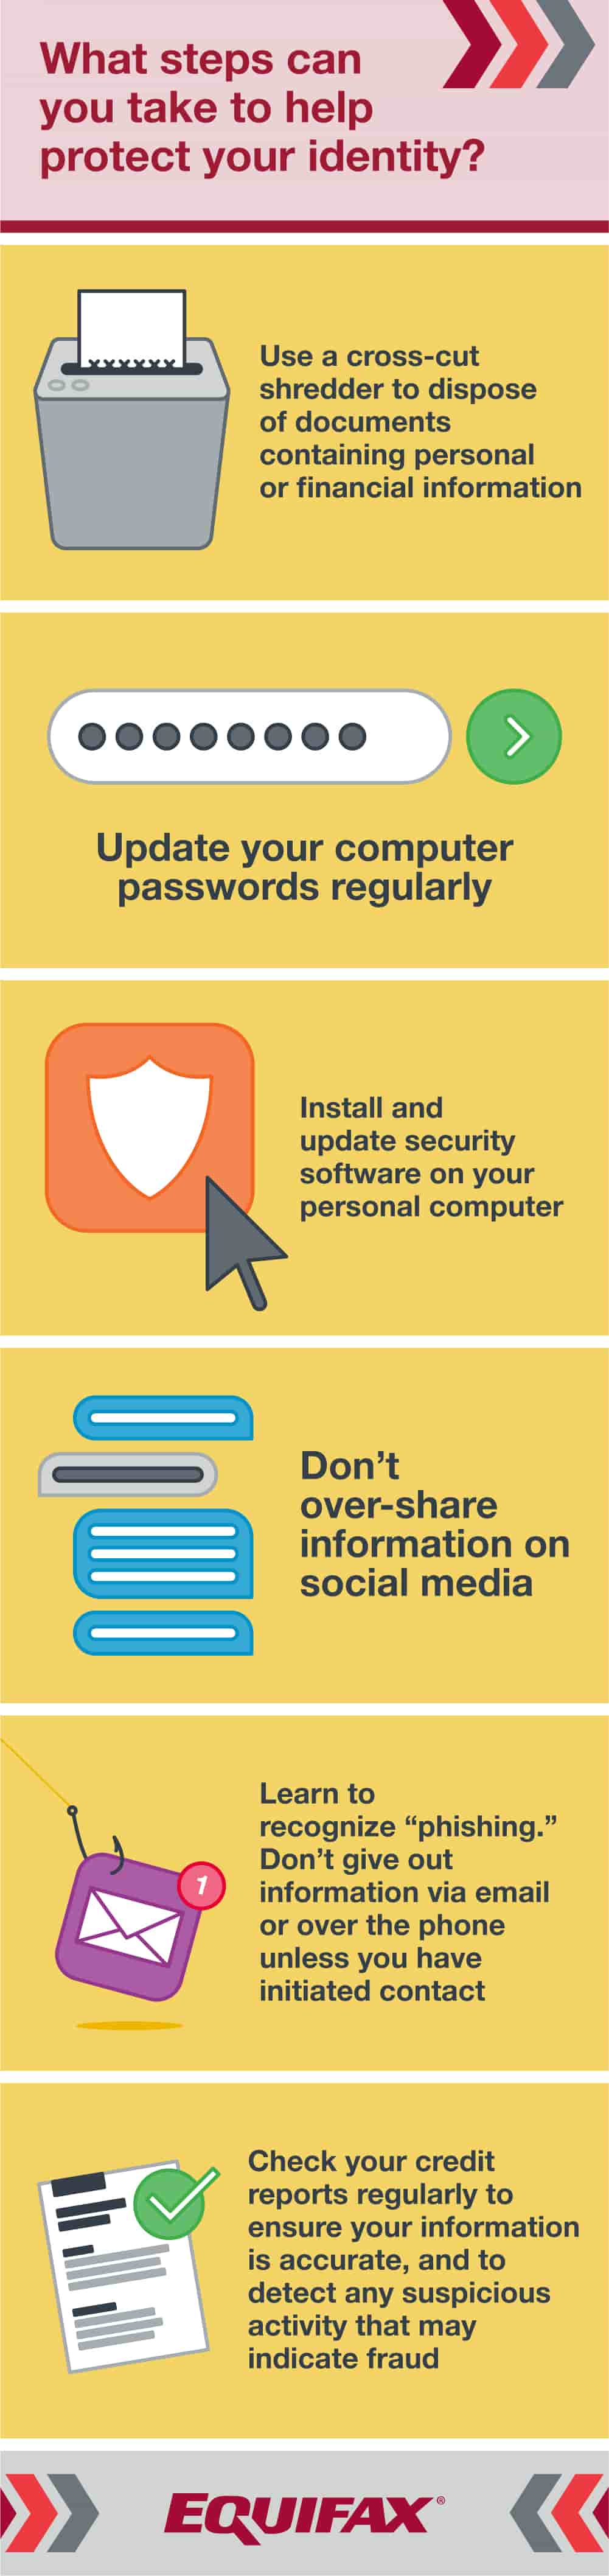 steps to take to protect your identity infographic